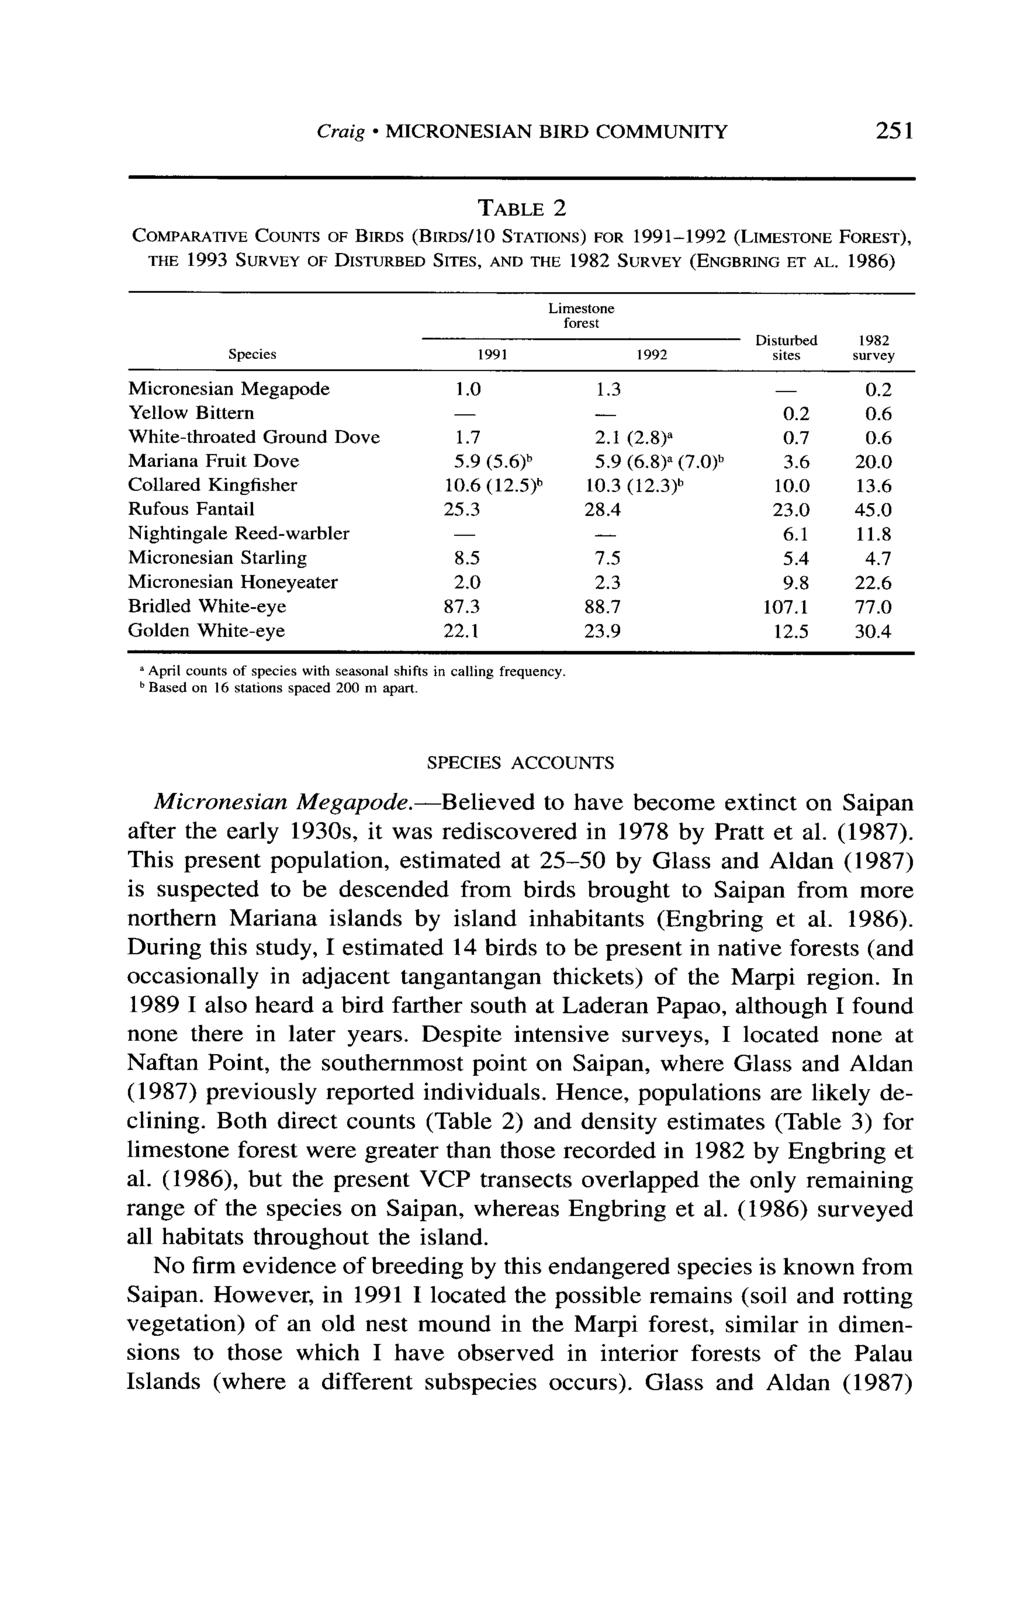 Craig * MICRONESIAN BIRD COMMUNITY 251 TABLE 2 COMPARATIVE COUNTS OF BIRDS (BIRDS~O STATIONS) FOR 1991-1992 (LIMESTONE FOREST), THE 1993 SURVEY OF DISTURBED SITES, AND THE 1982 SURVEY (ENGBRING ET AL.